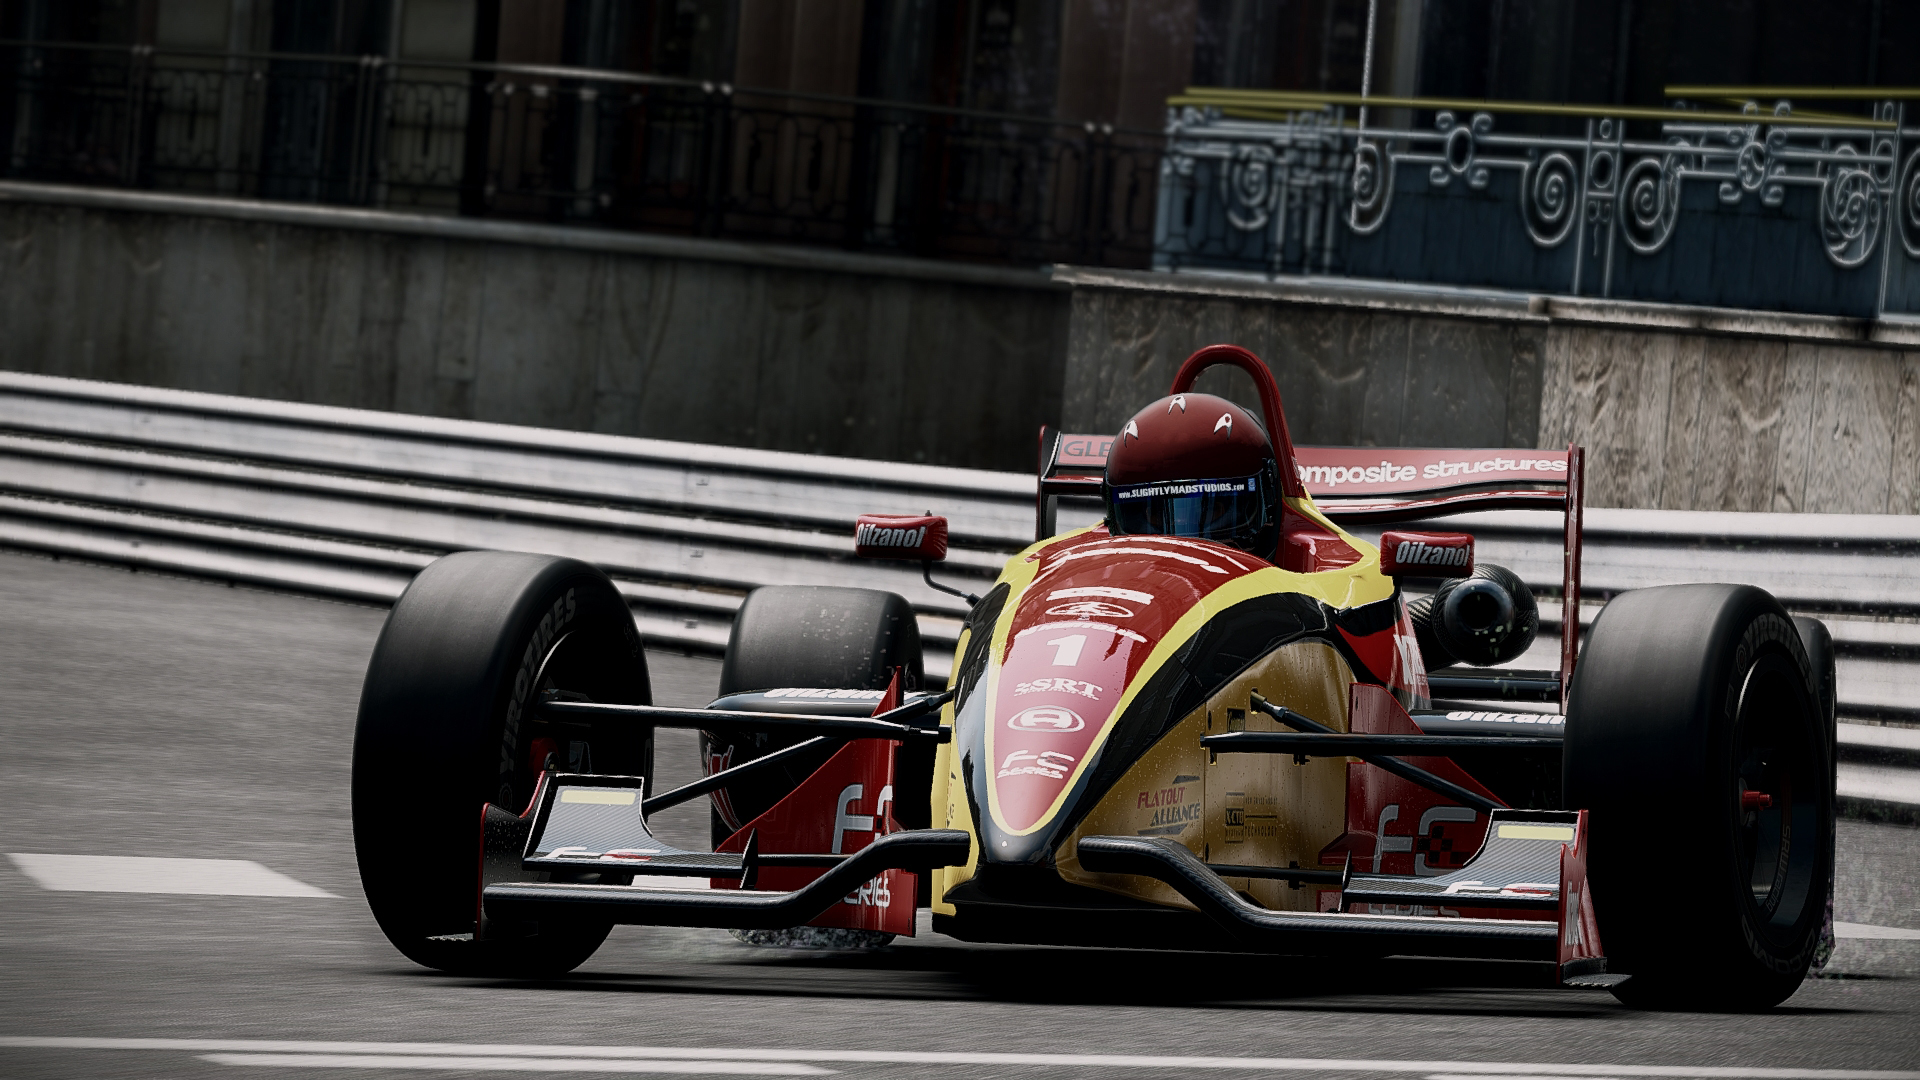 Project CARS Review in Progress - GameSpot